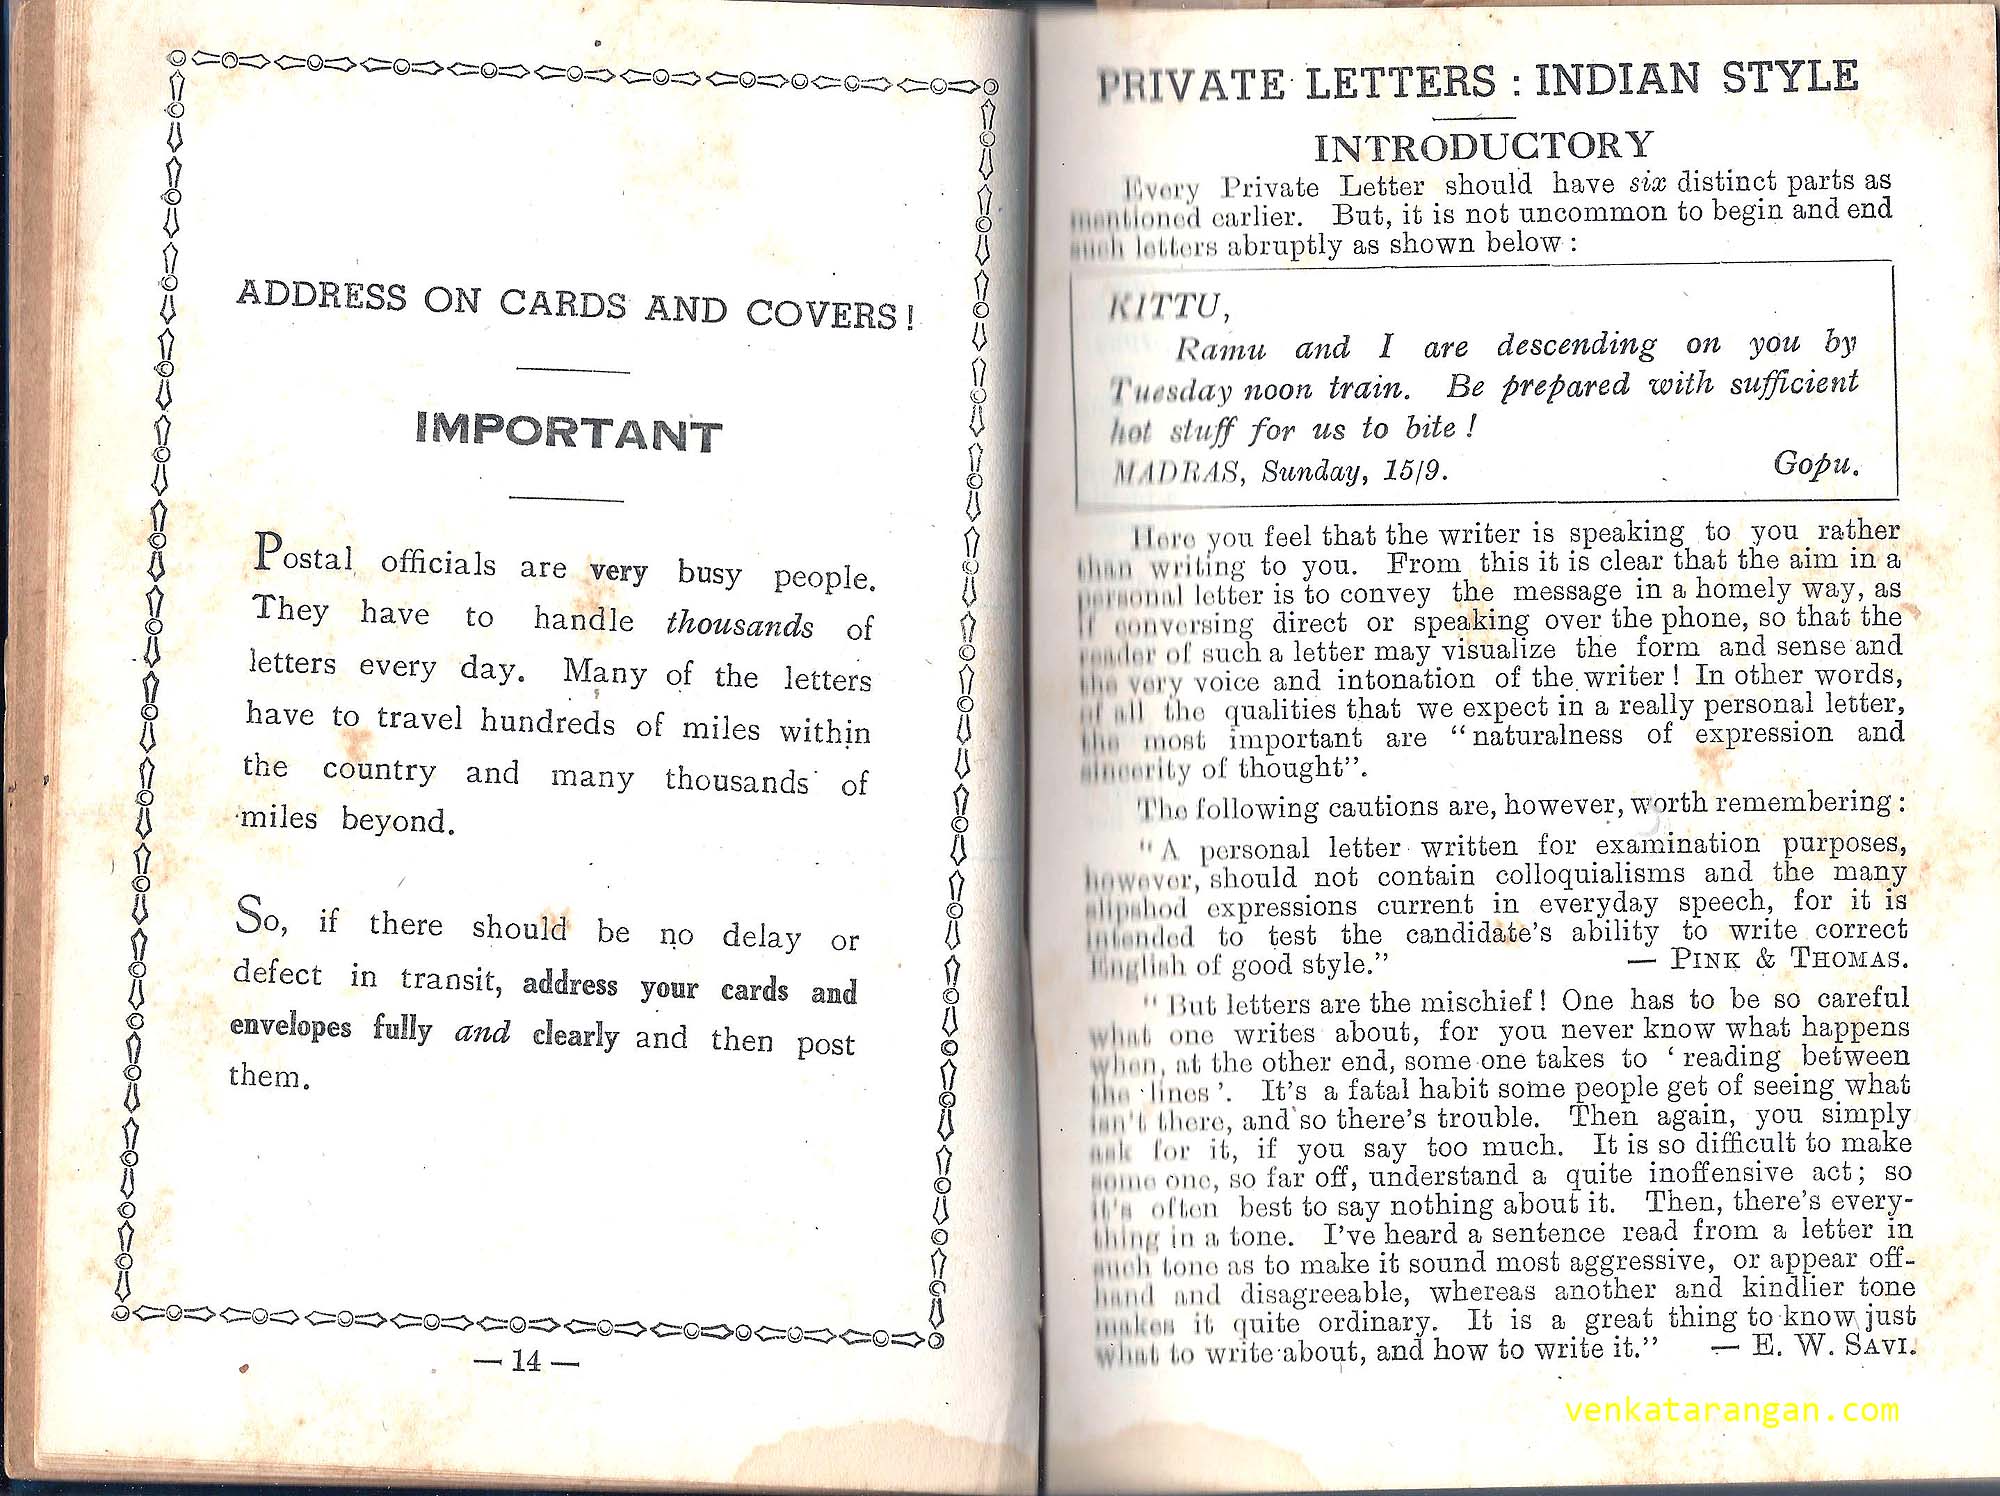 Introduction to Private Letters, Indian Style. Every Private Letter should have six distinct parts as mentioned earlier. Important Notice: Postal Officials are very busy people. They have to handle thousands of letters every day. Many of the letters have to travel hundreds of miles within the country and many thousands of miles beyond. So, if there should be no delay or defect in transit, address your cards and envelopes fully and clearly and then post them.